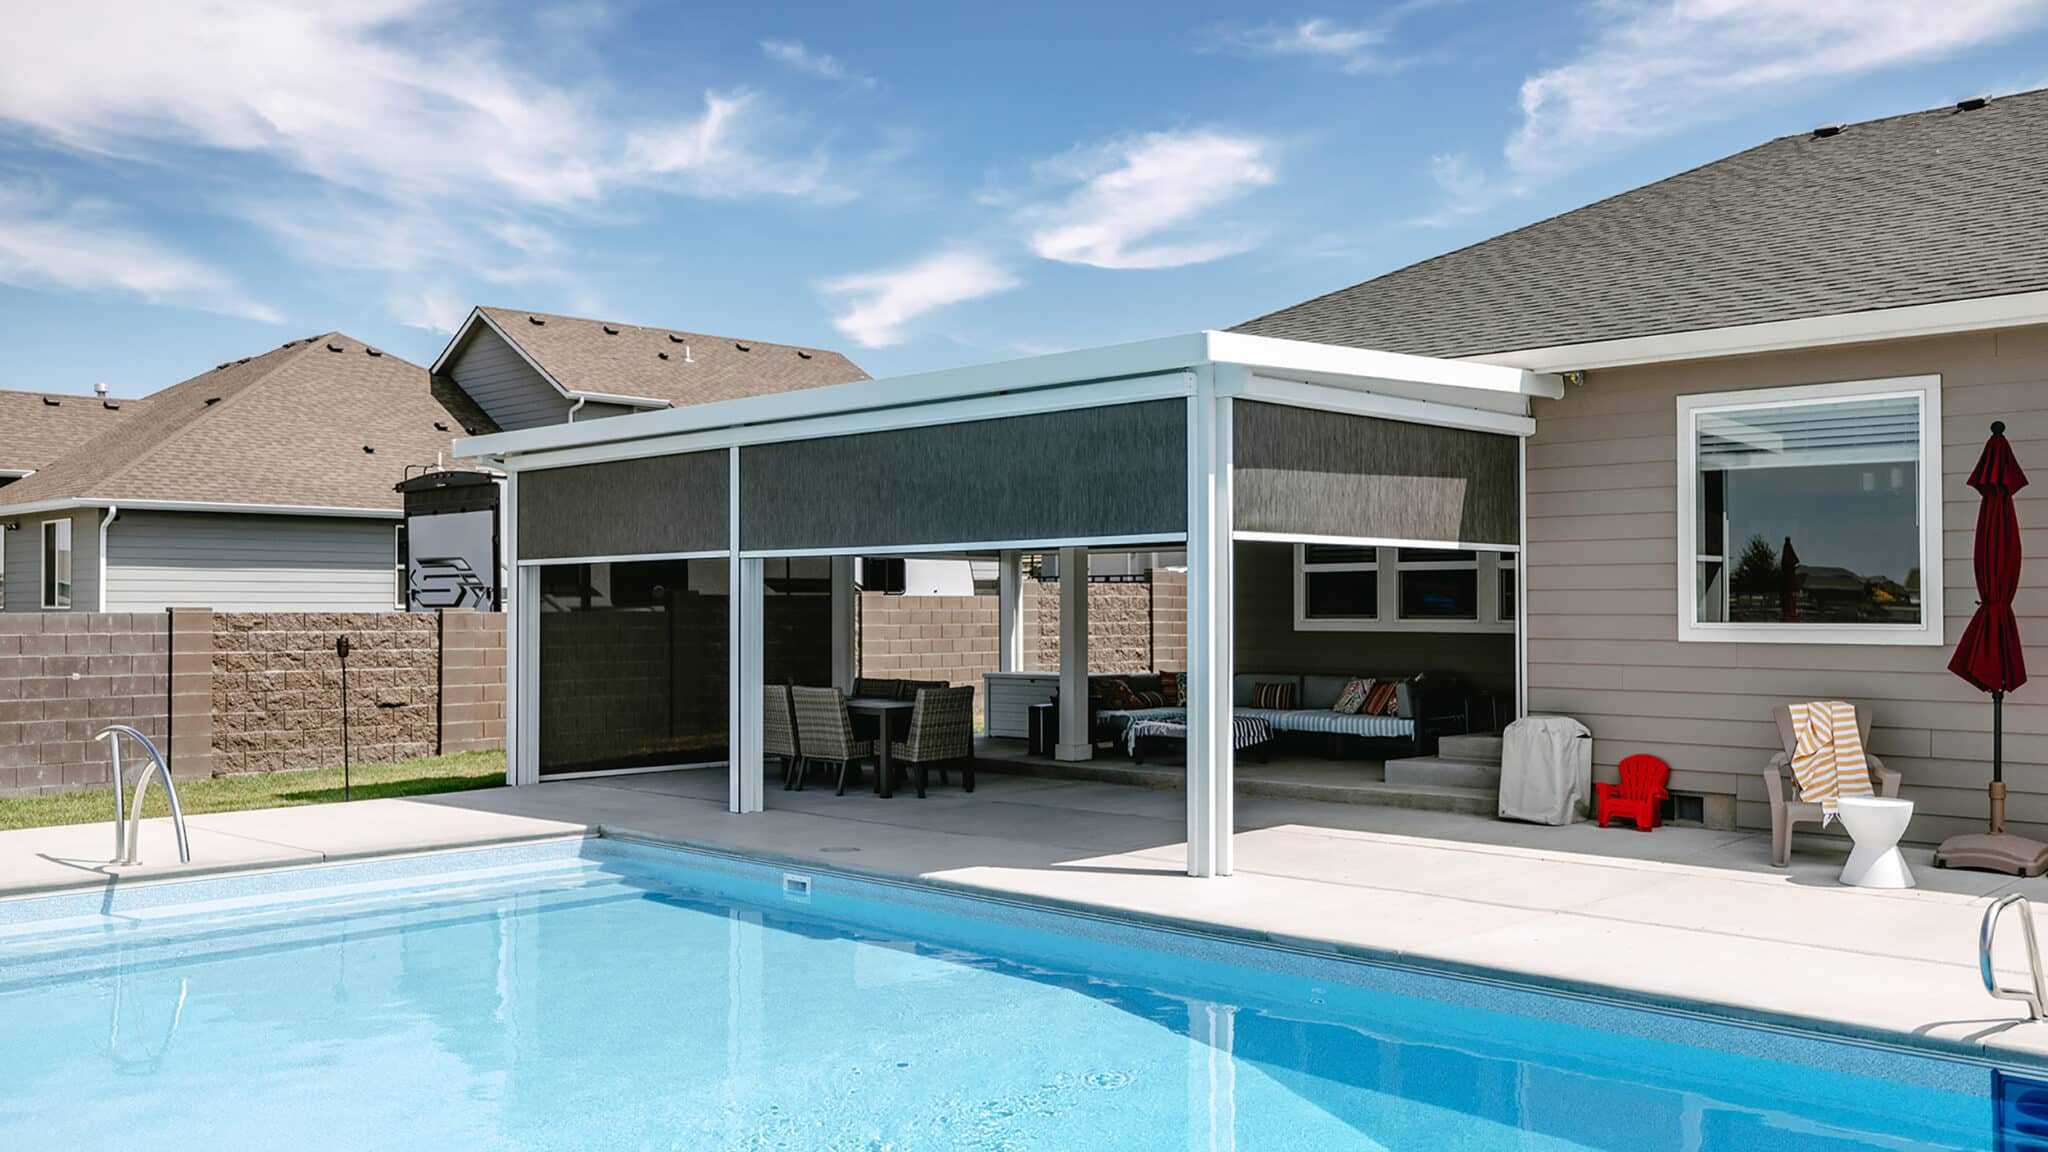 exterior screens in your pool area Patio Covers Unlimited